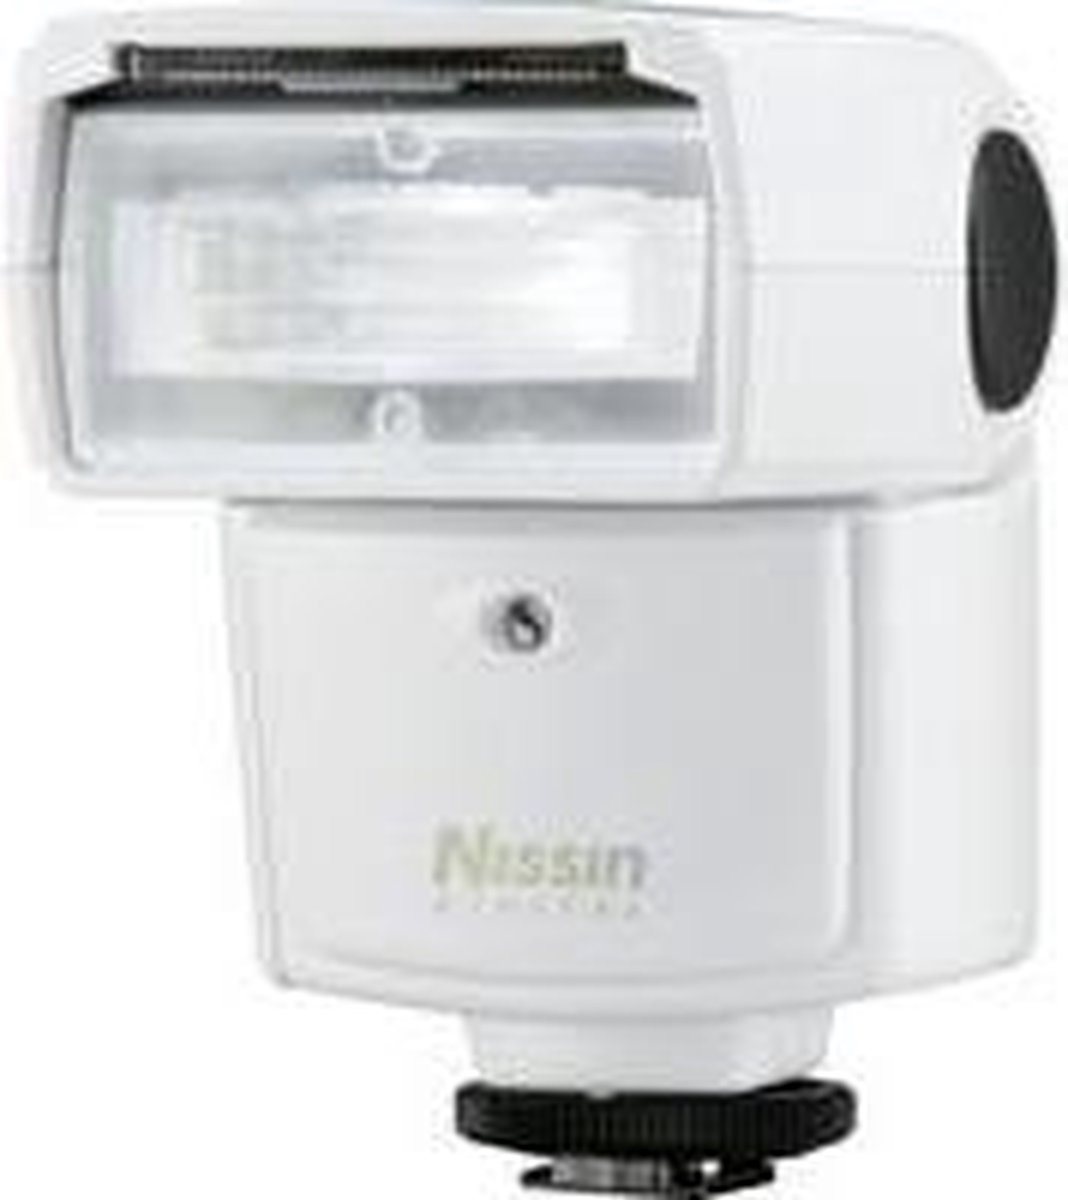 Nissin Di466 for micro four thirds (white)